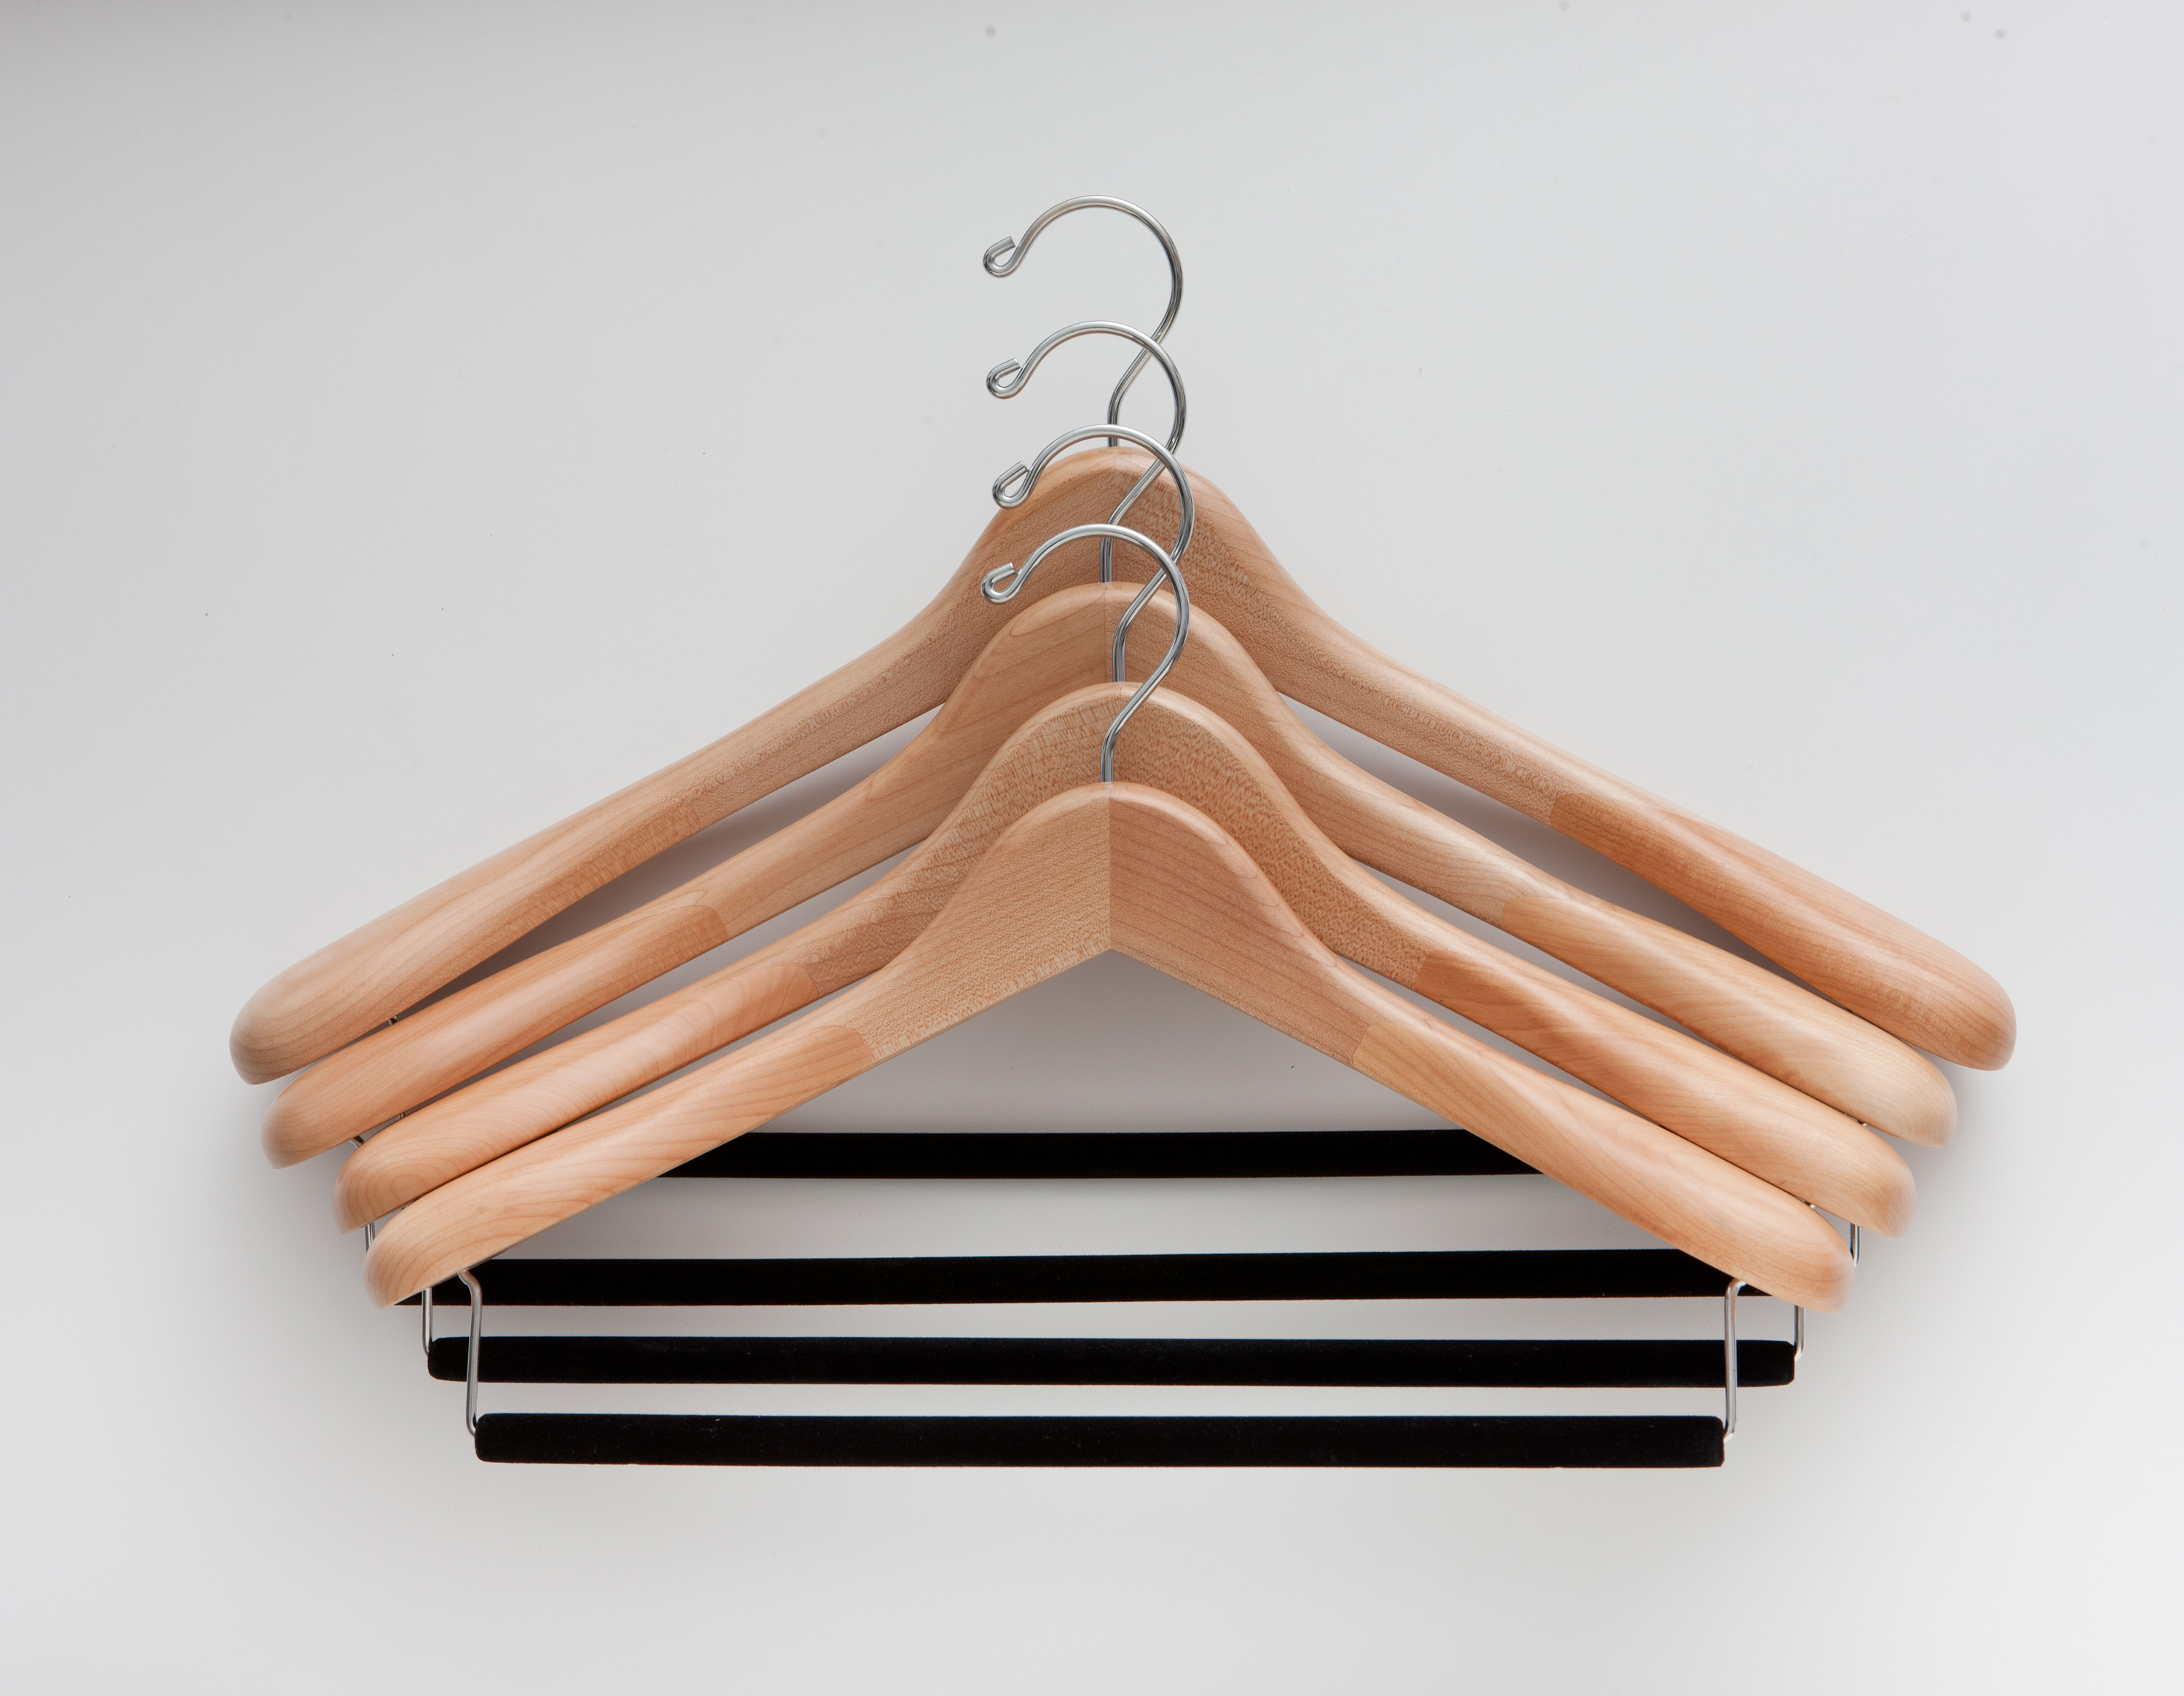 The four sizes of our Luxury Suit Hangers: small 15.5", medium 17.0", large 18.5", and extra-large 20.0"!